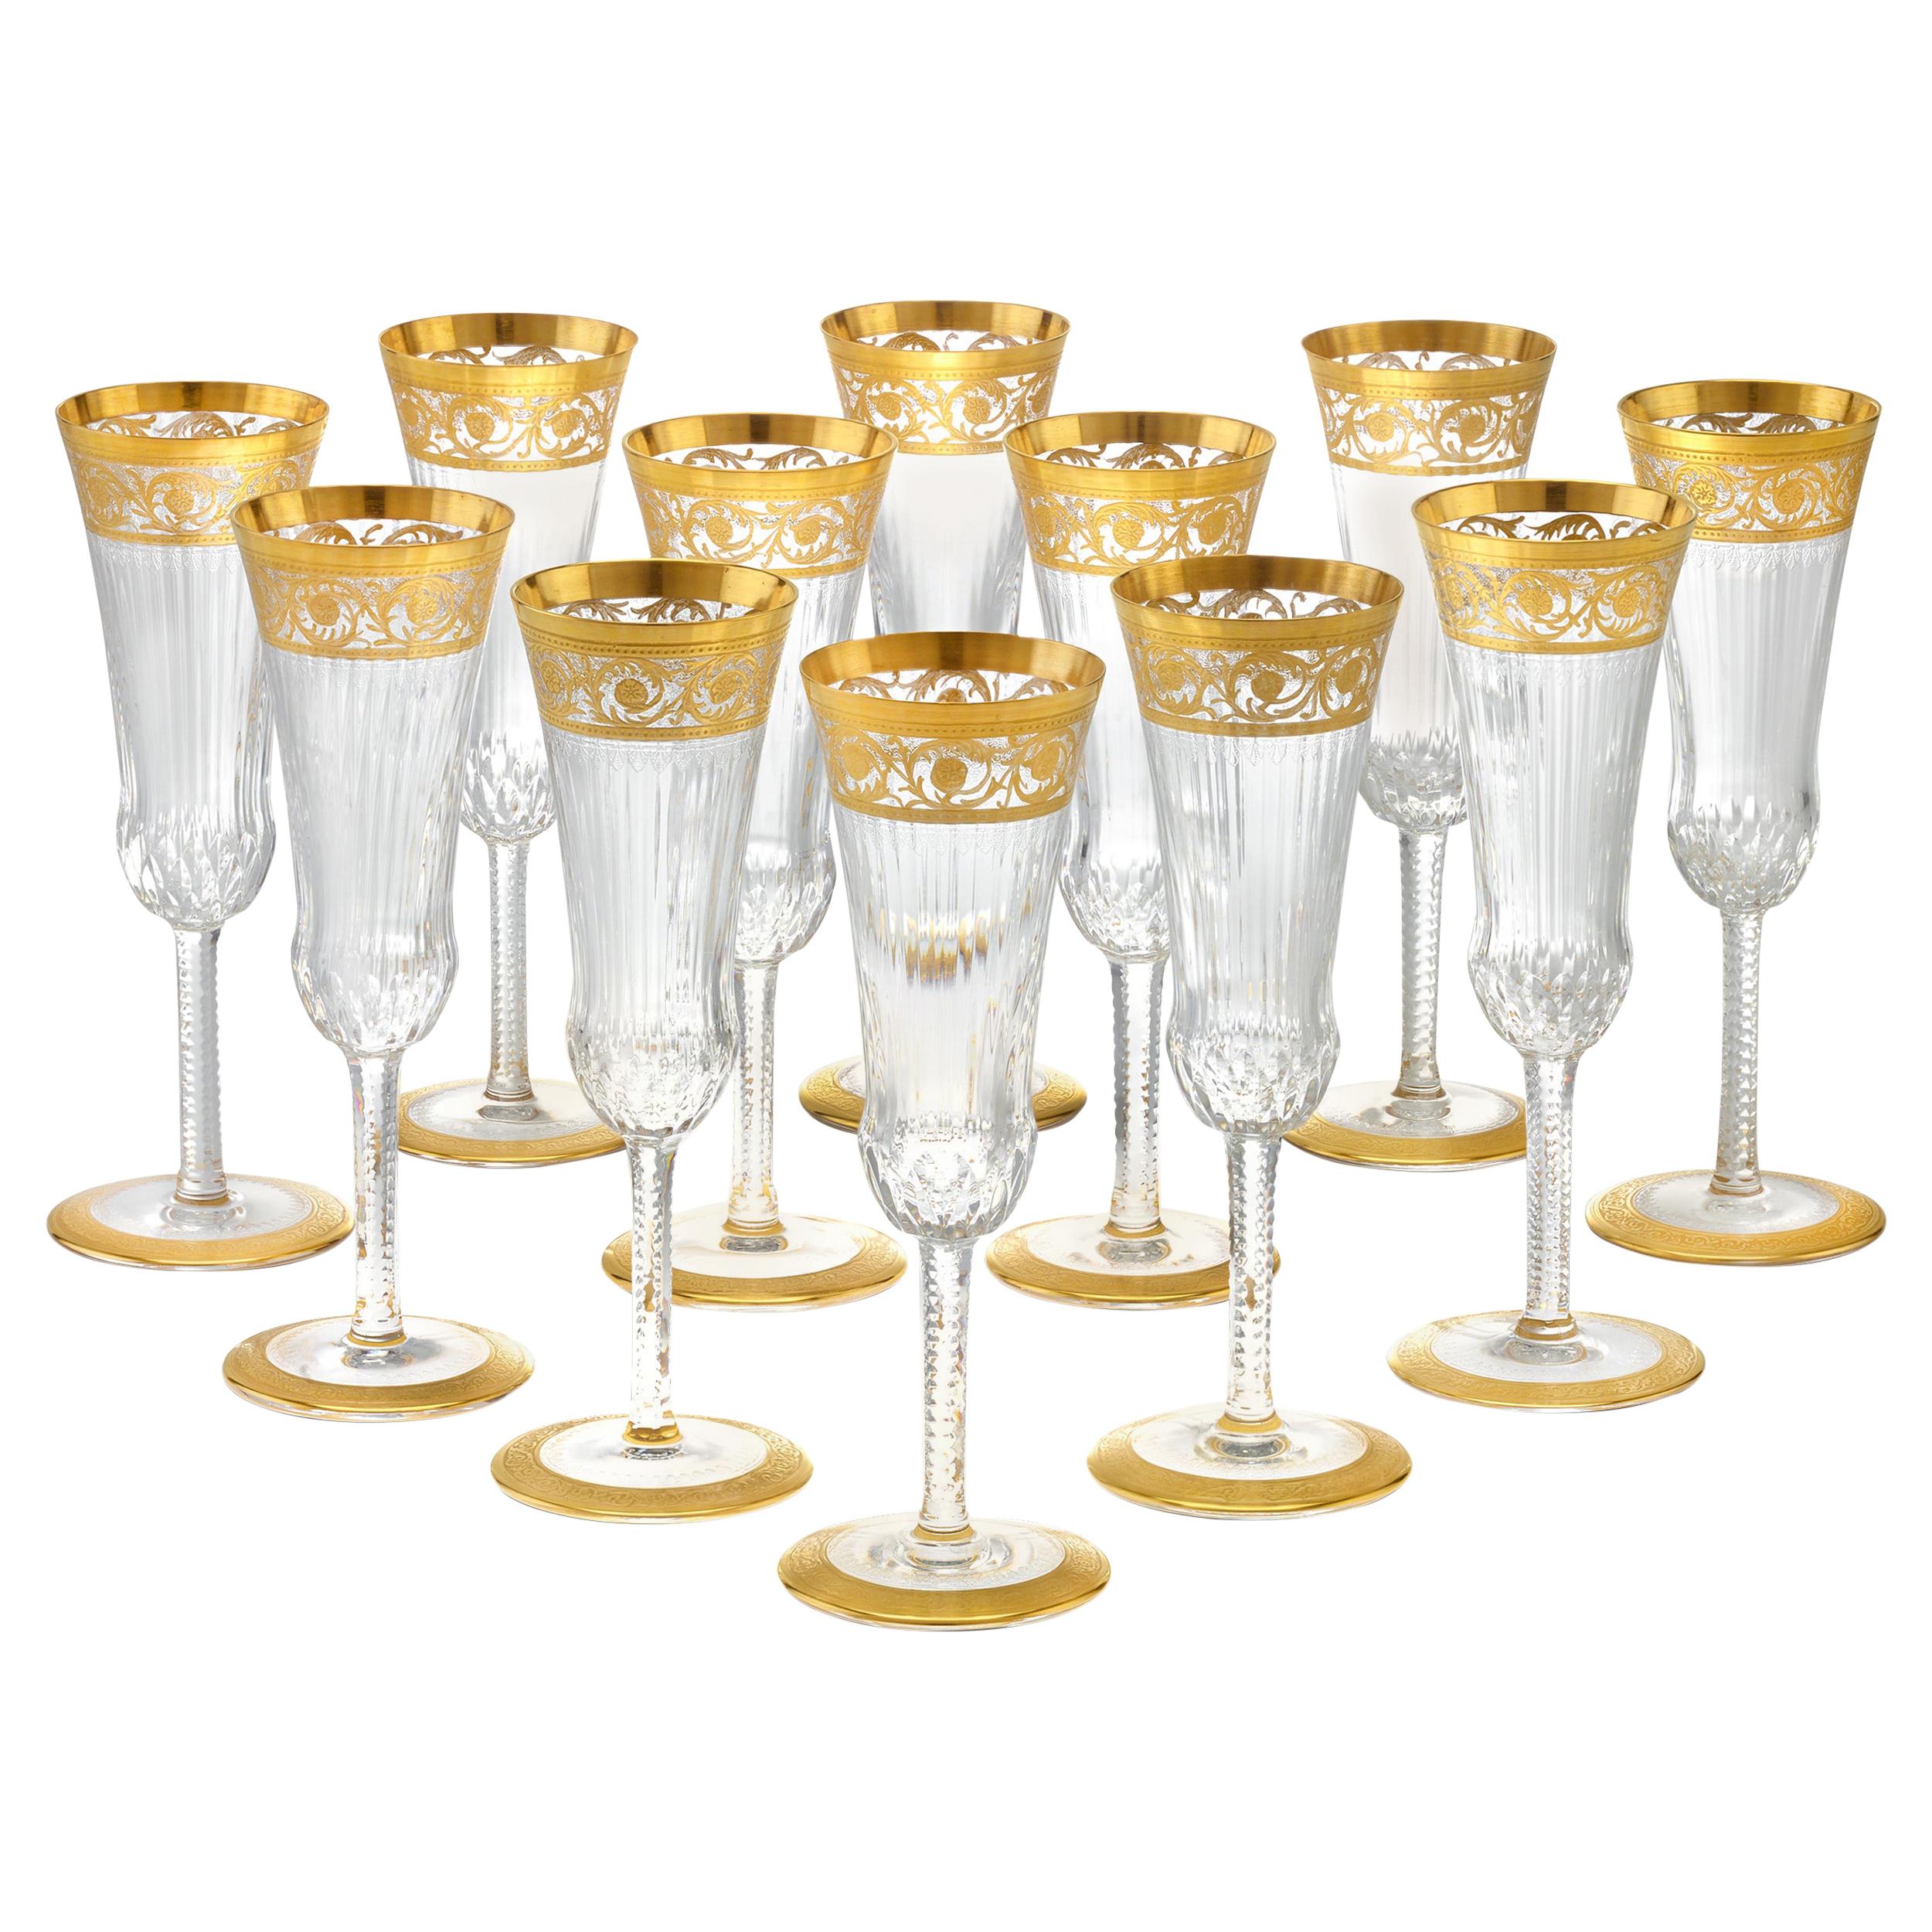 Thistle Crystal Champagne Flutes by Saint Louis, Set of 12